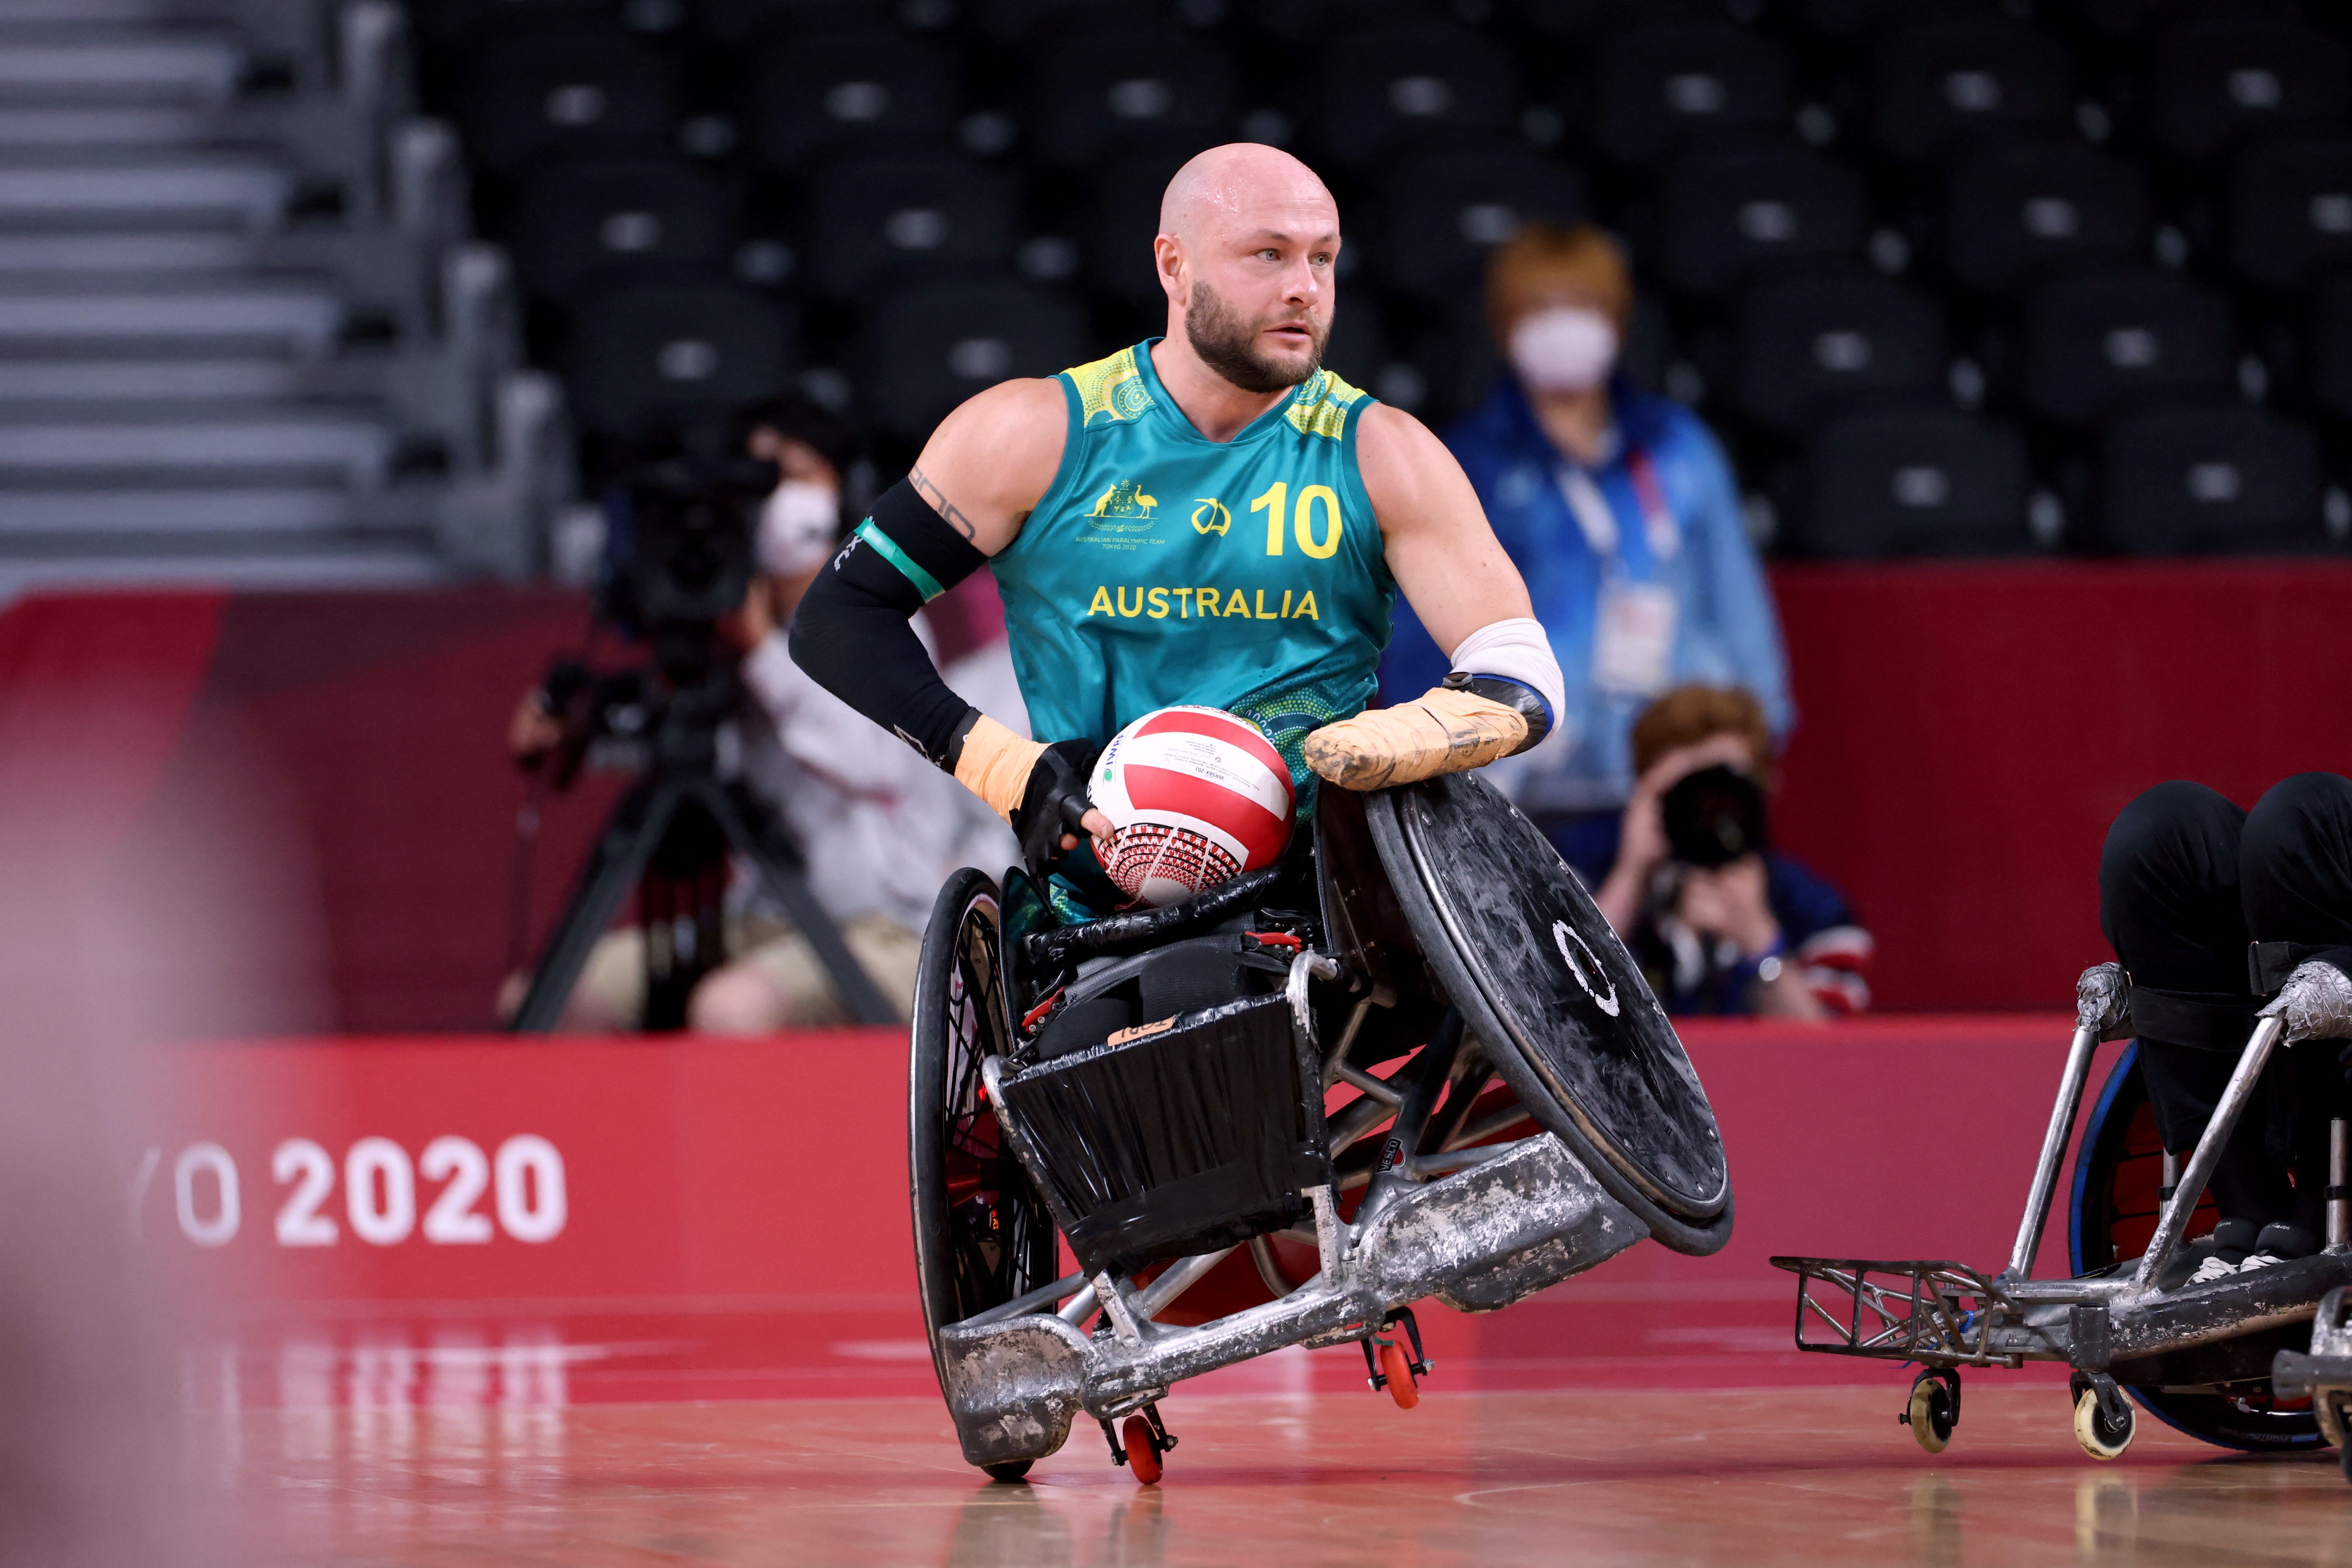 Paralympian and Australian Wheelchair Rugby Captain Chris Bond